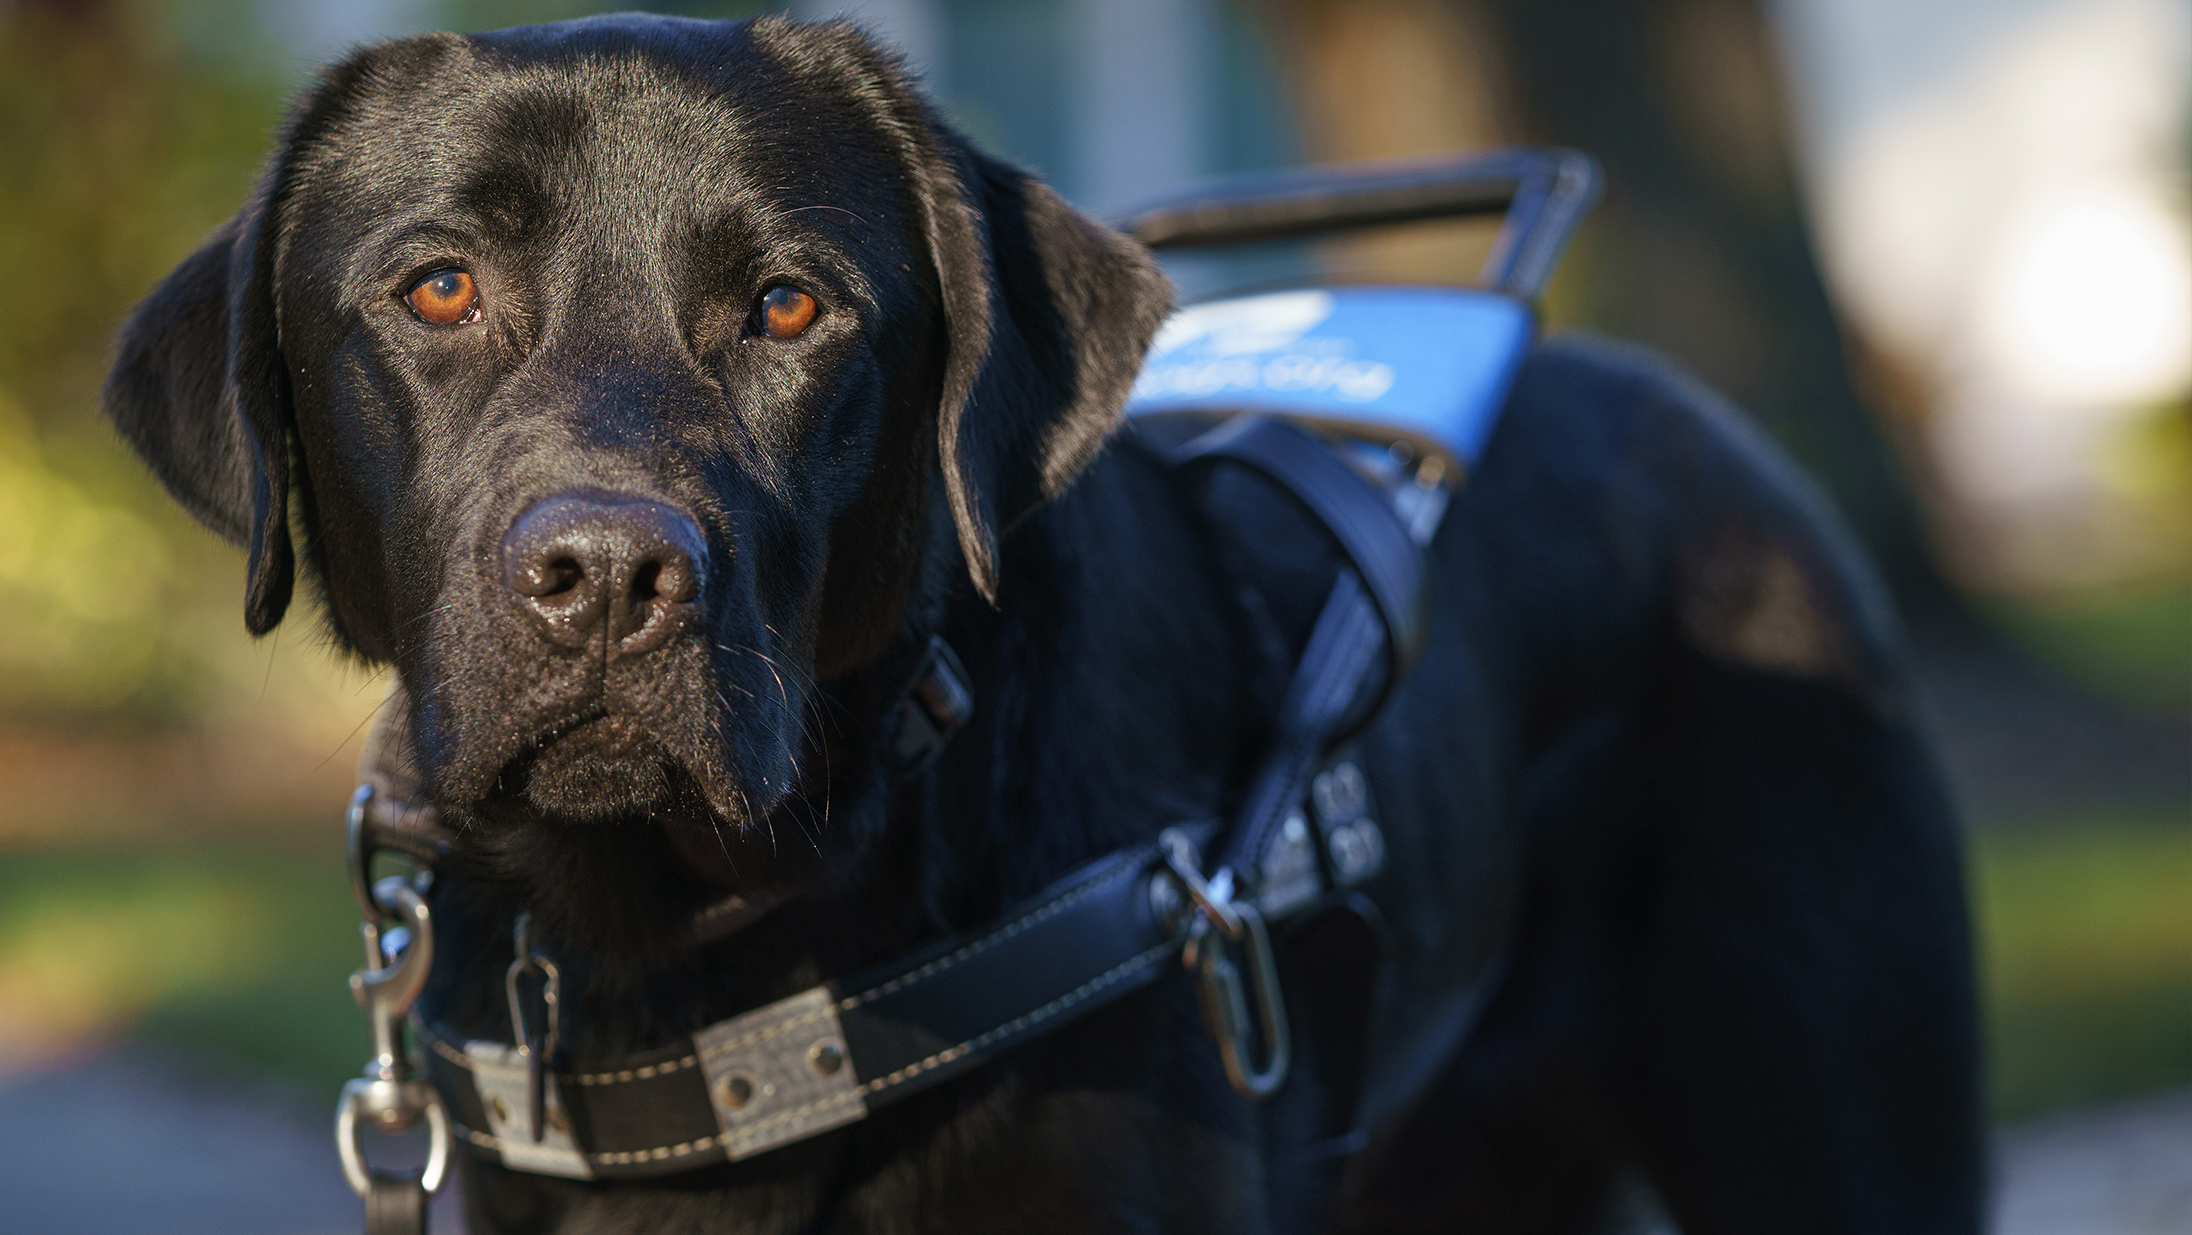 A black lab guide dog with golden eyes looks directly foward